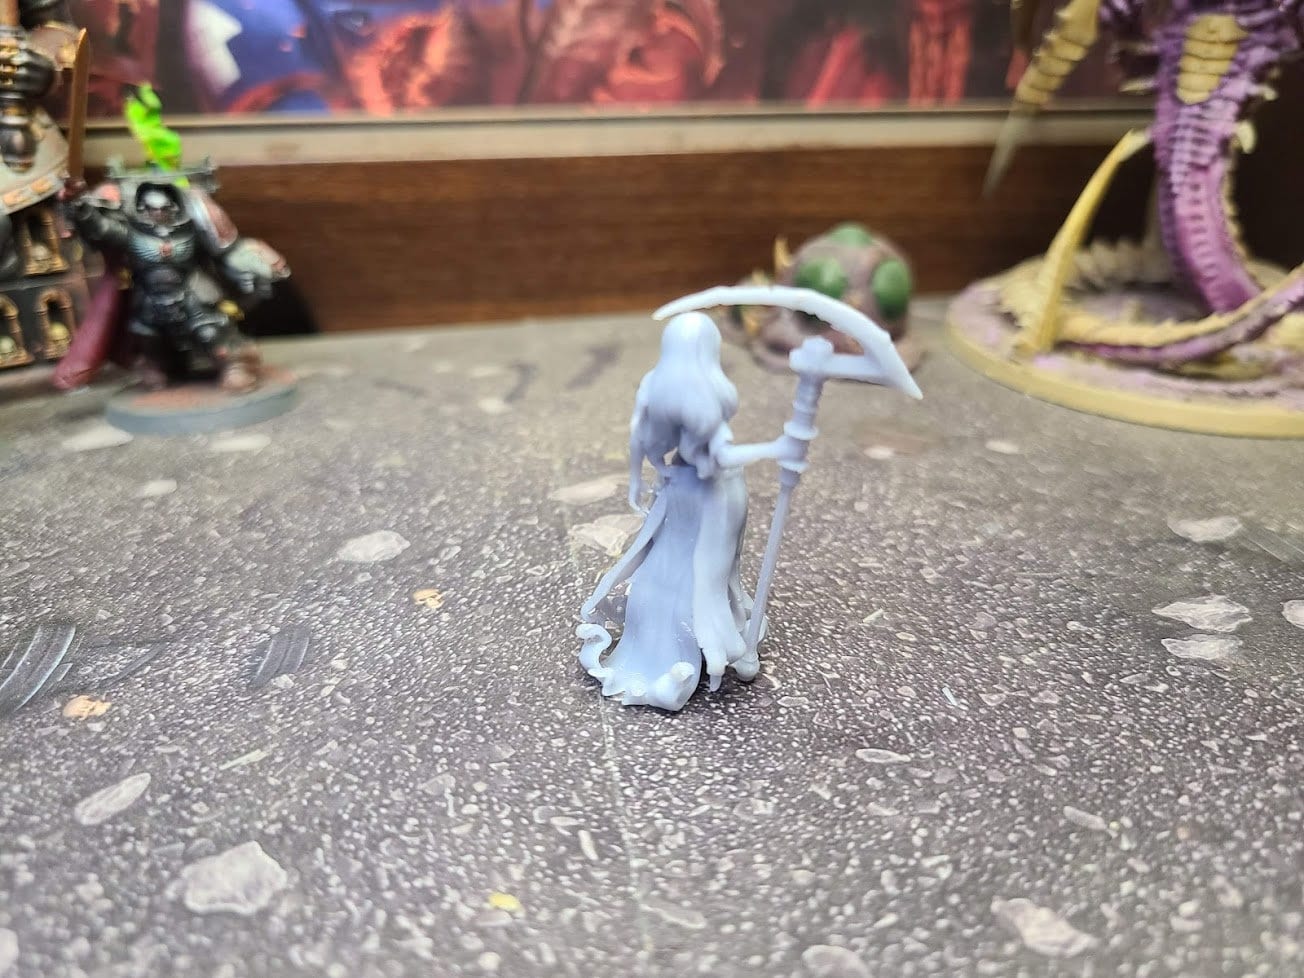 Avatar of Death | Tabletop Roleplaying Miniatures | 28mm Scale